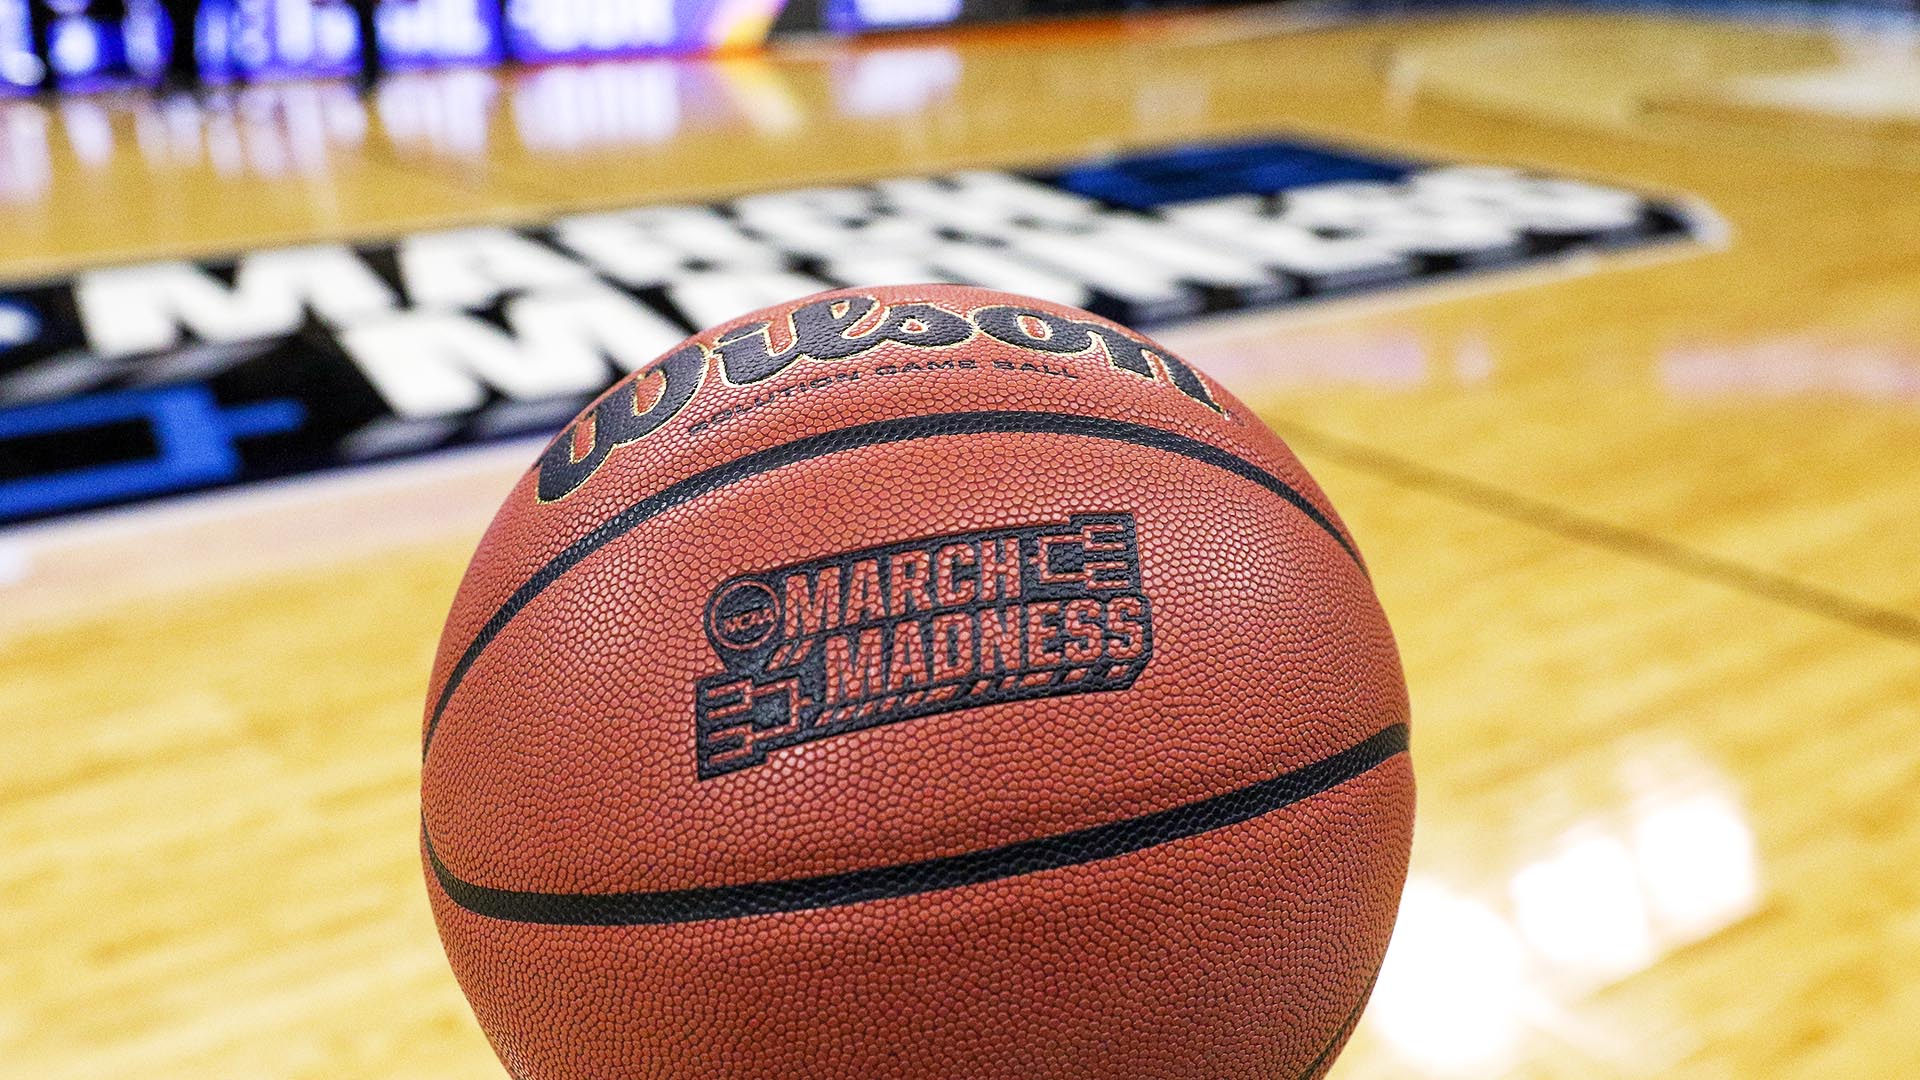 A game ball with the NCAA tournament logo in the background